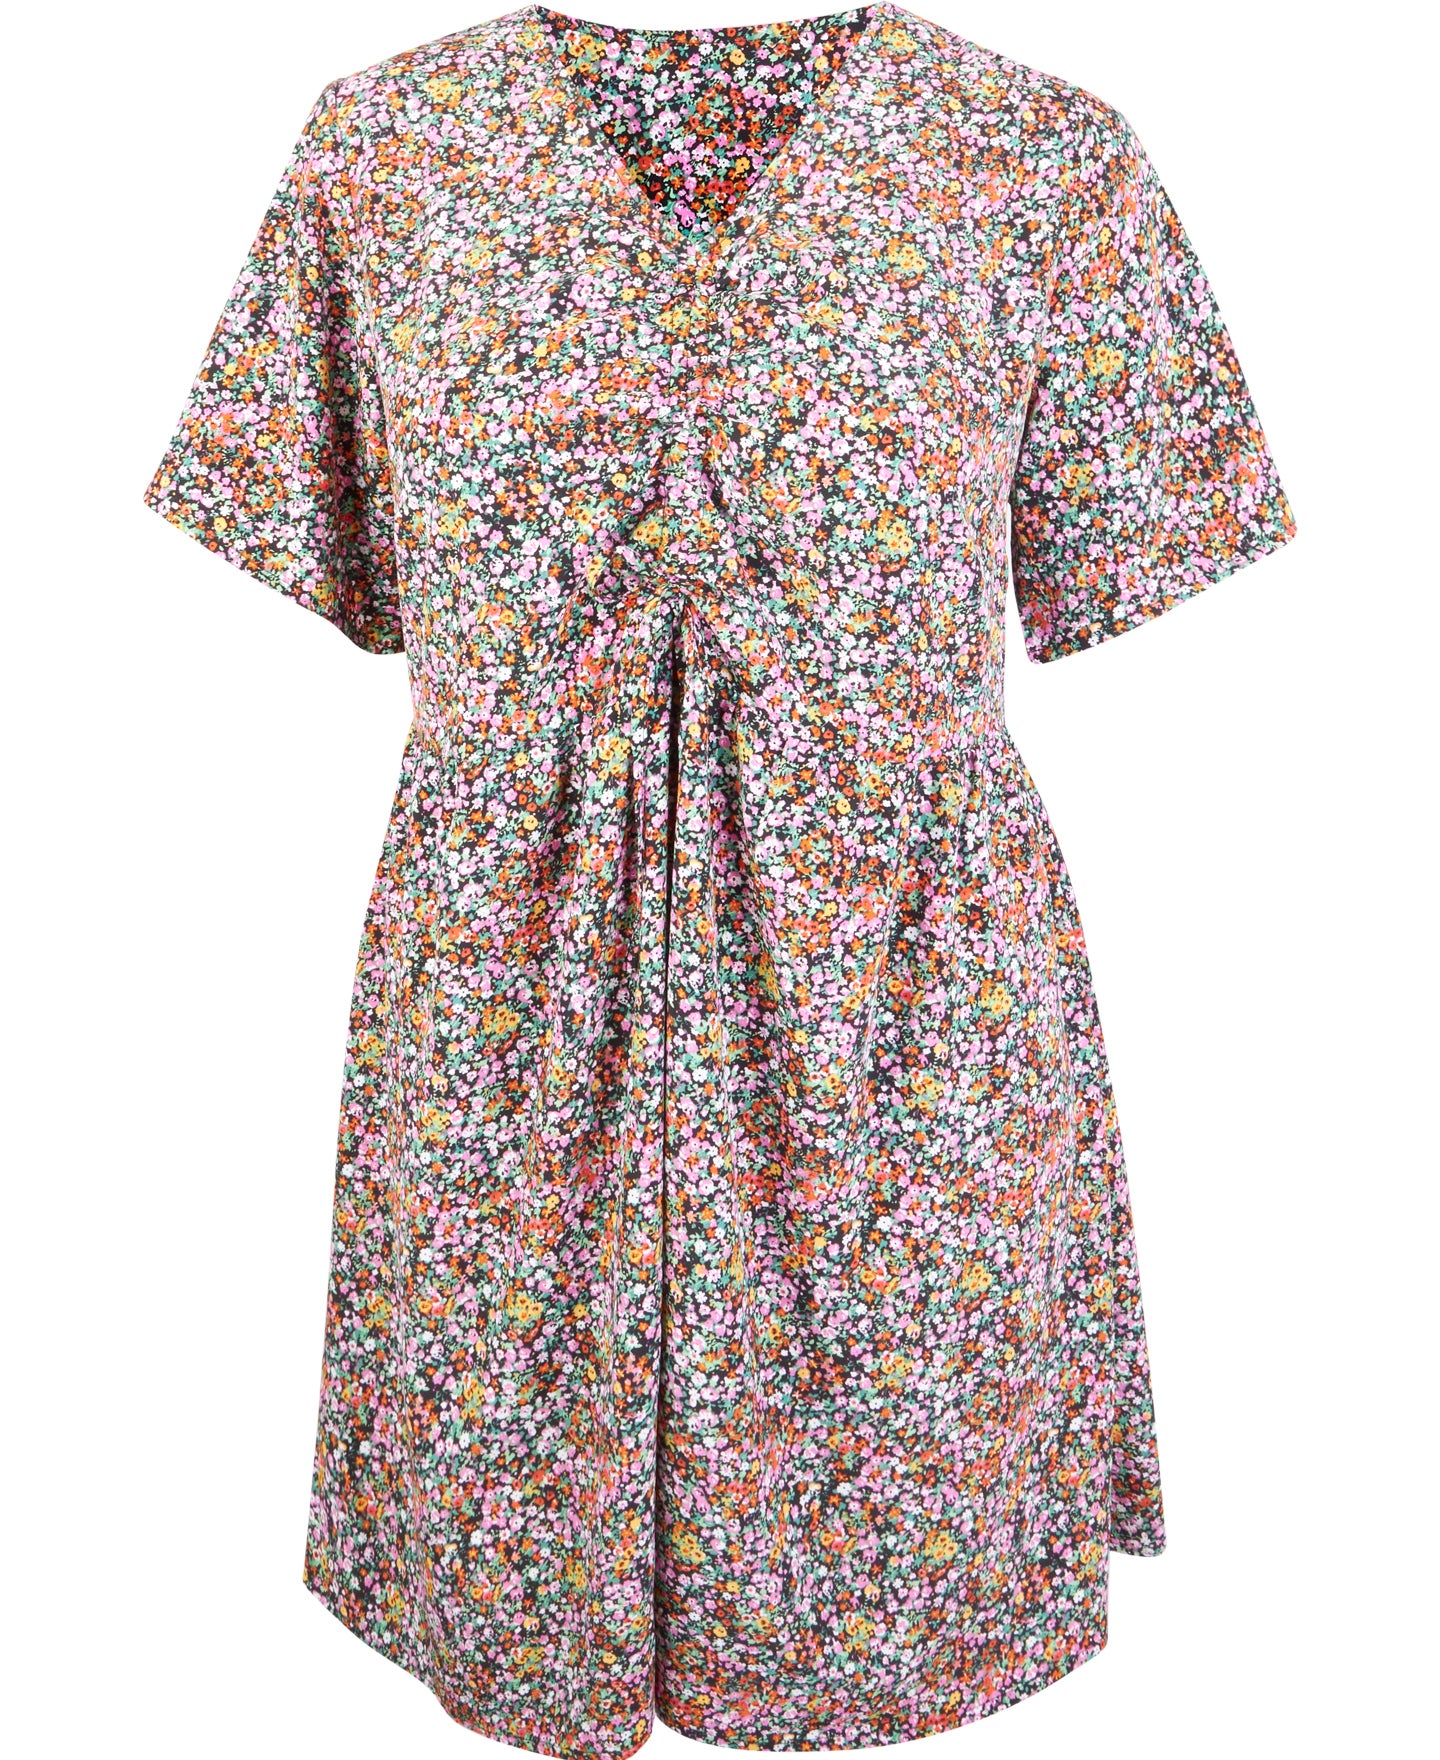 https://www.postie.co.nz/content/products/womens-isobelle-ruched-tie-front-dress-floral-print-a-outfit-820079.jpg